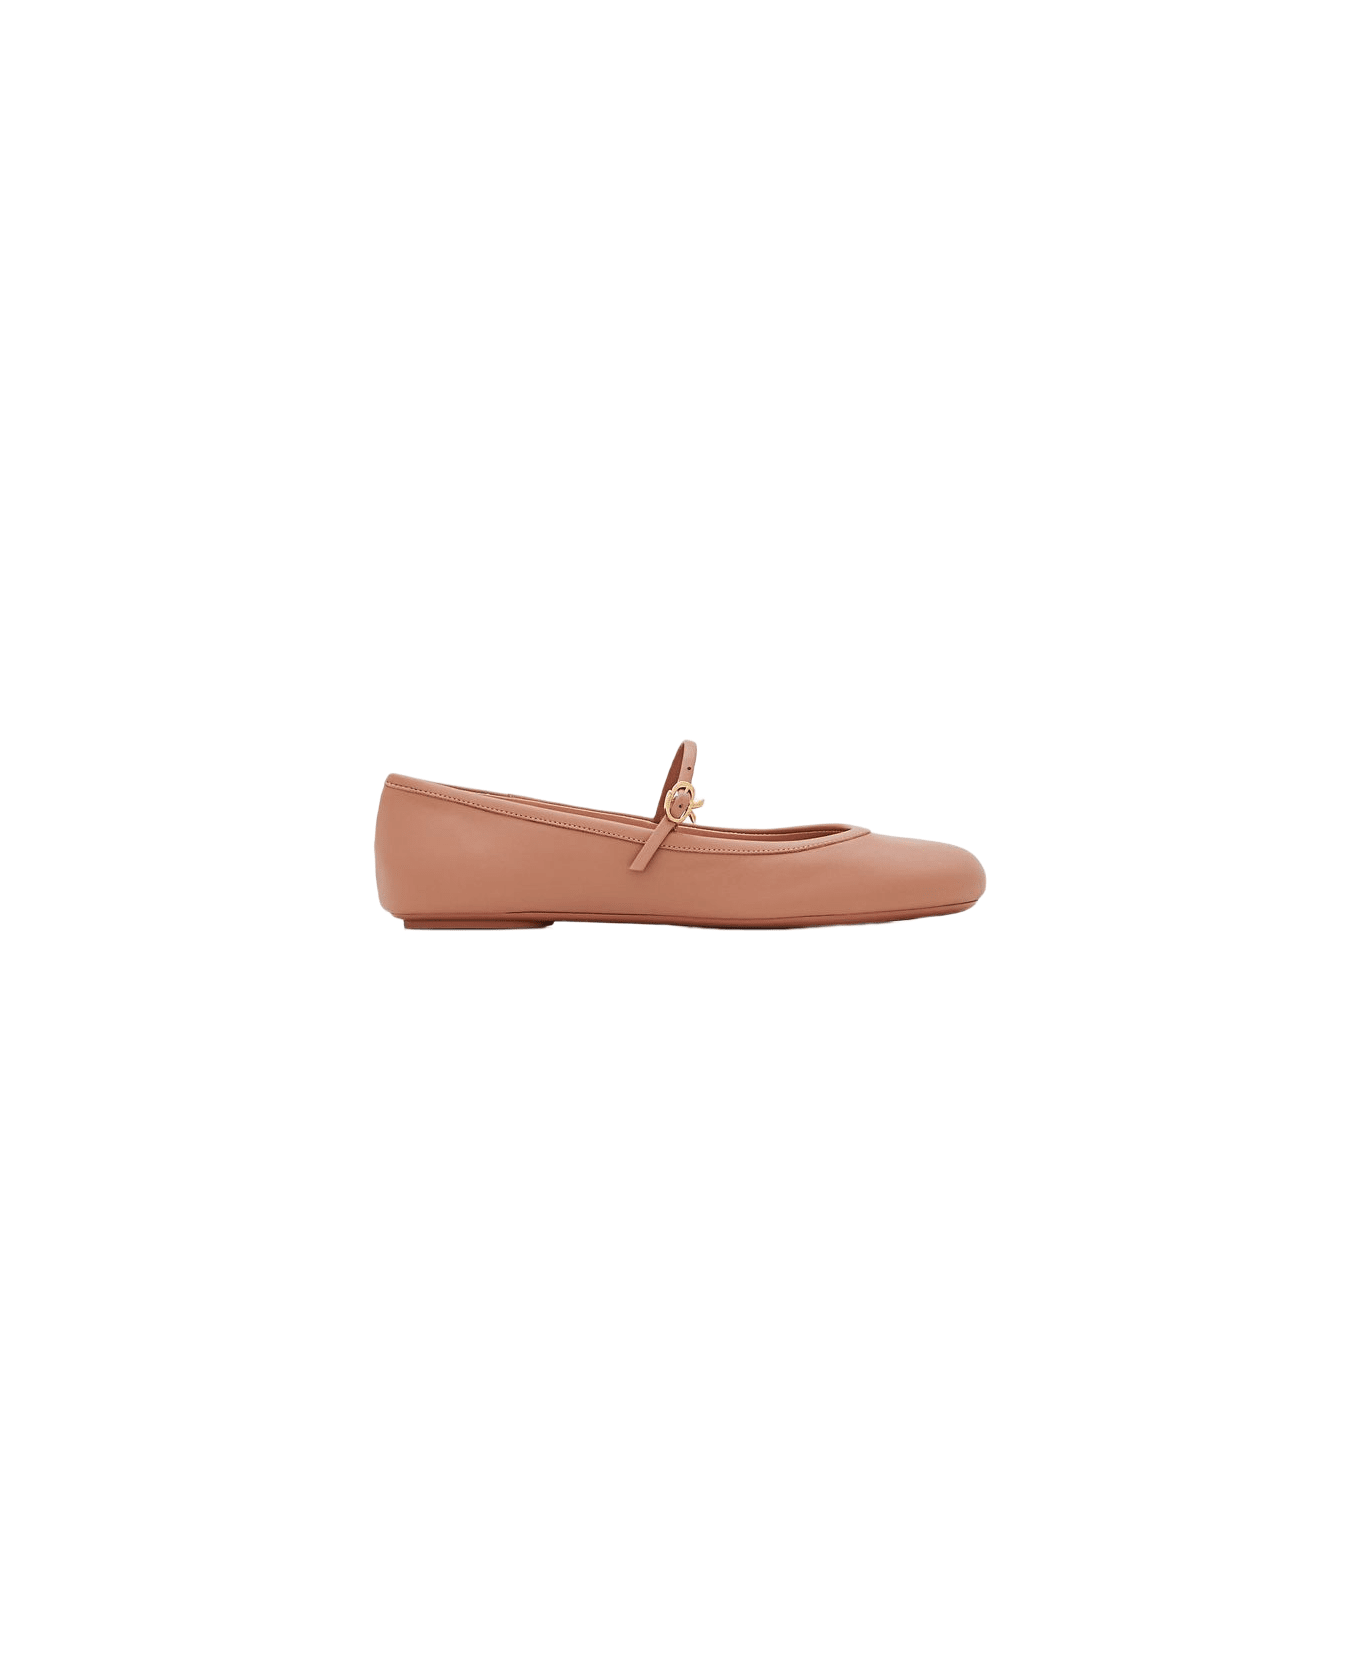 Gianvito Rossi Leather Ballet Flat - Rose